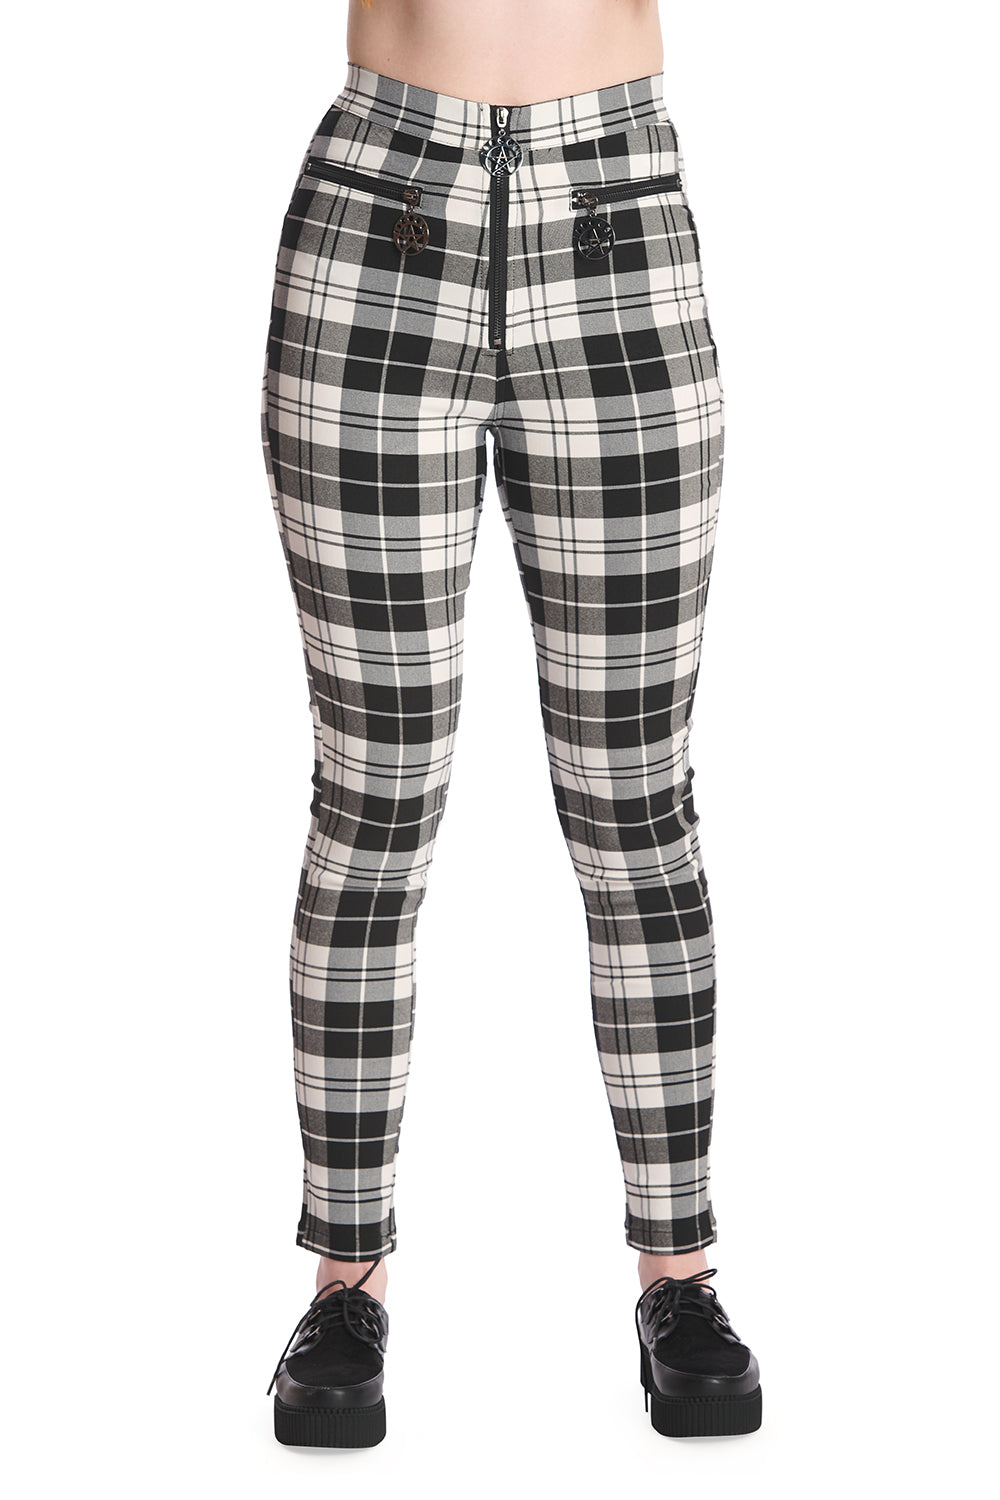  High waisted check skinny legged trousers in black and white 